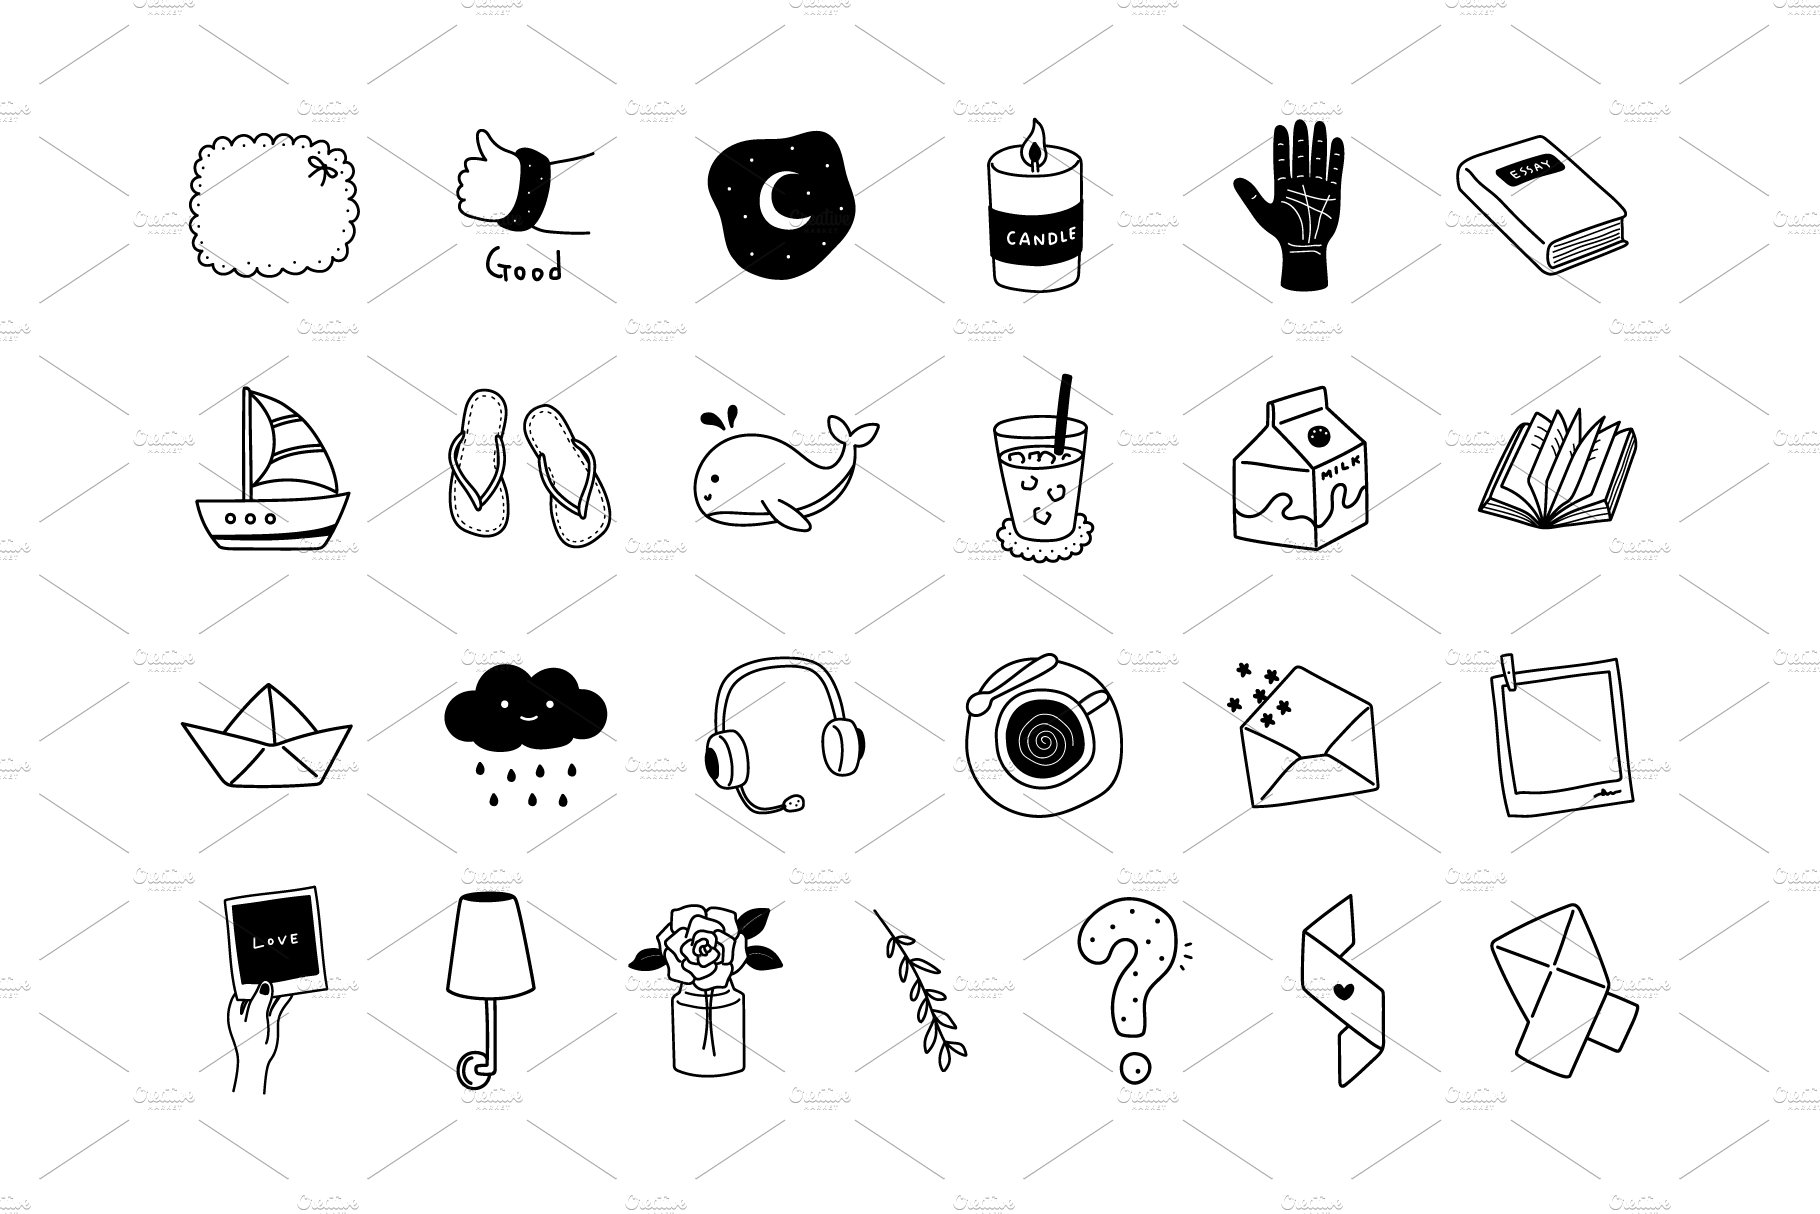 49 black and white doodle icons preview image.